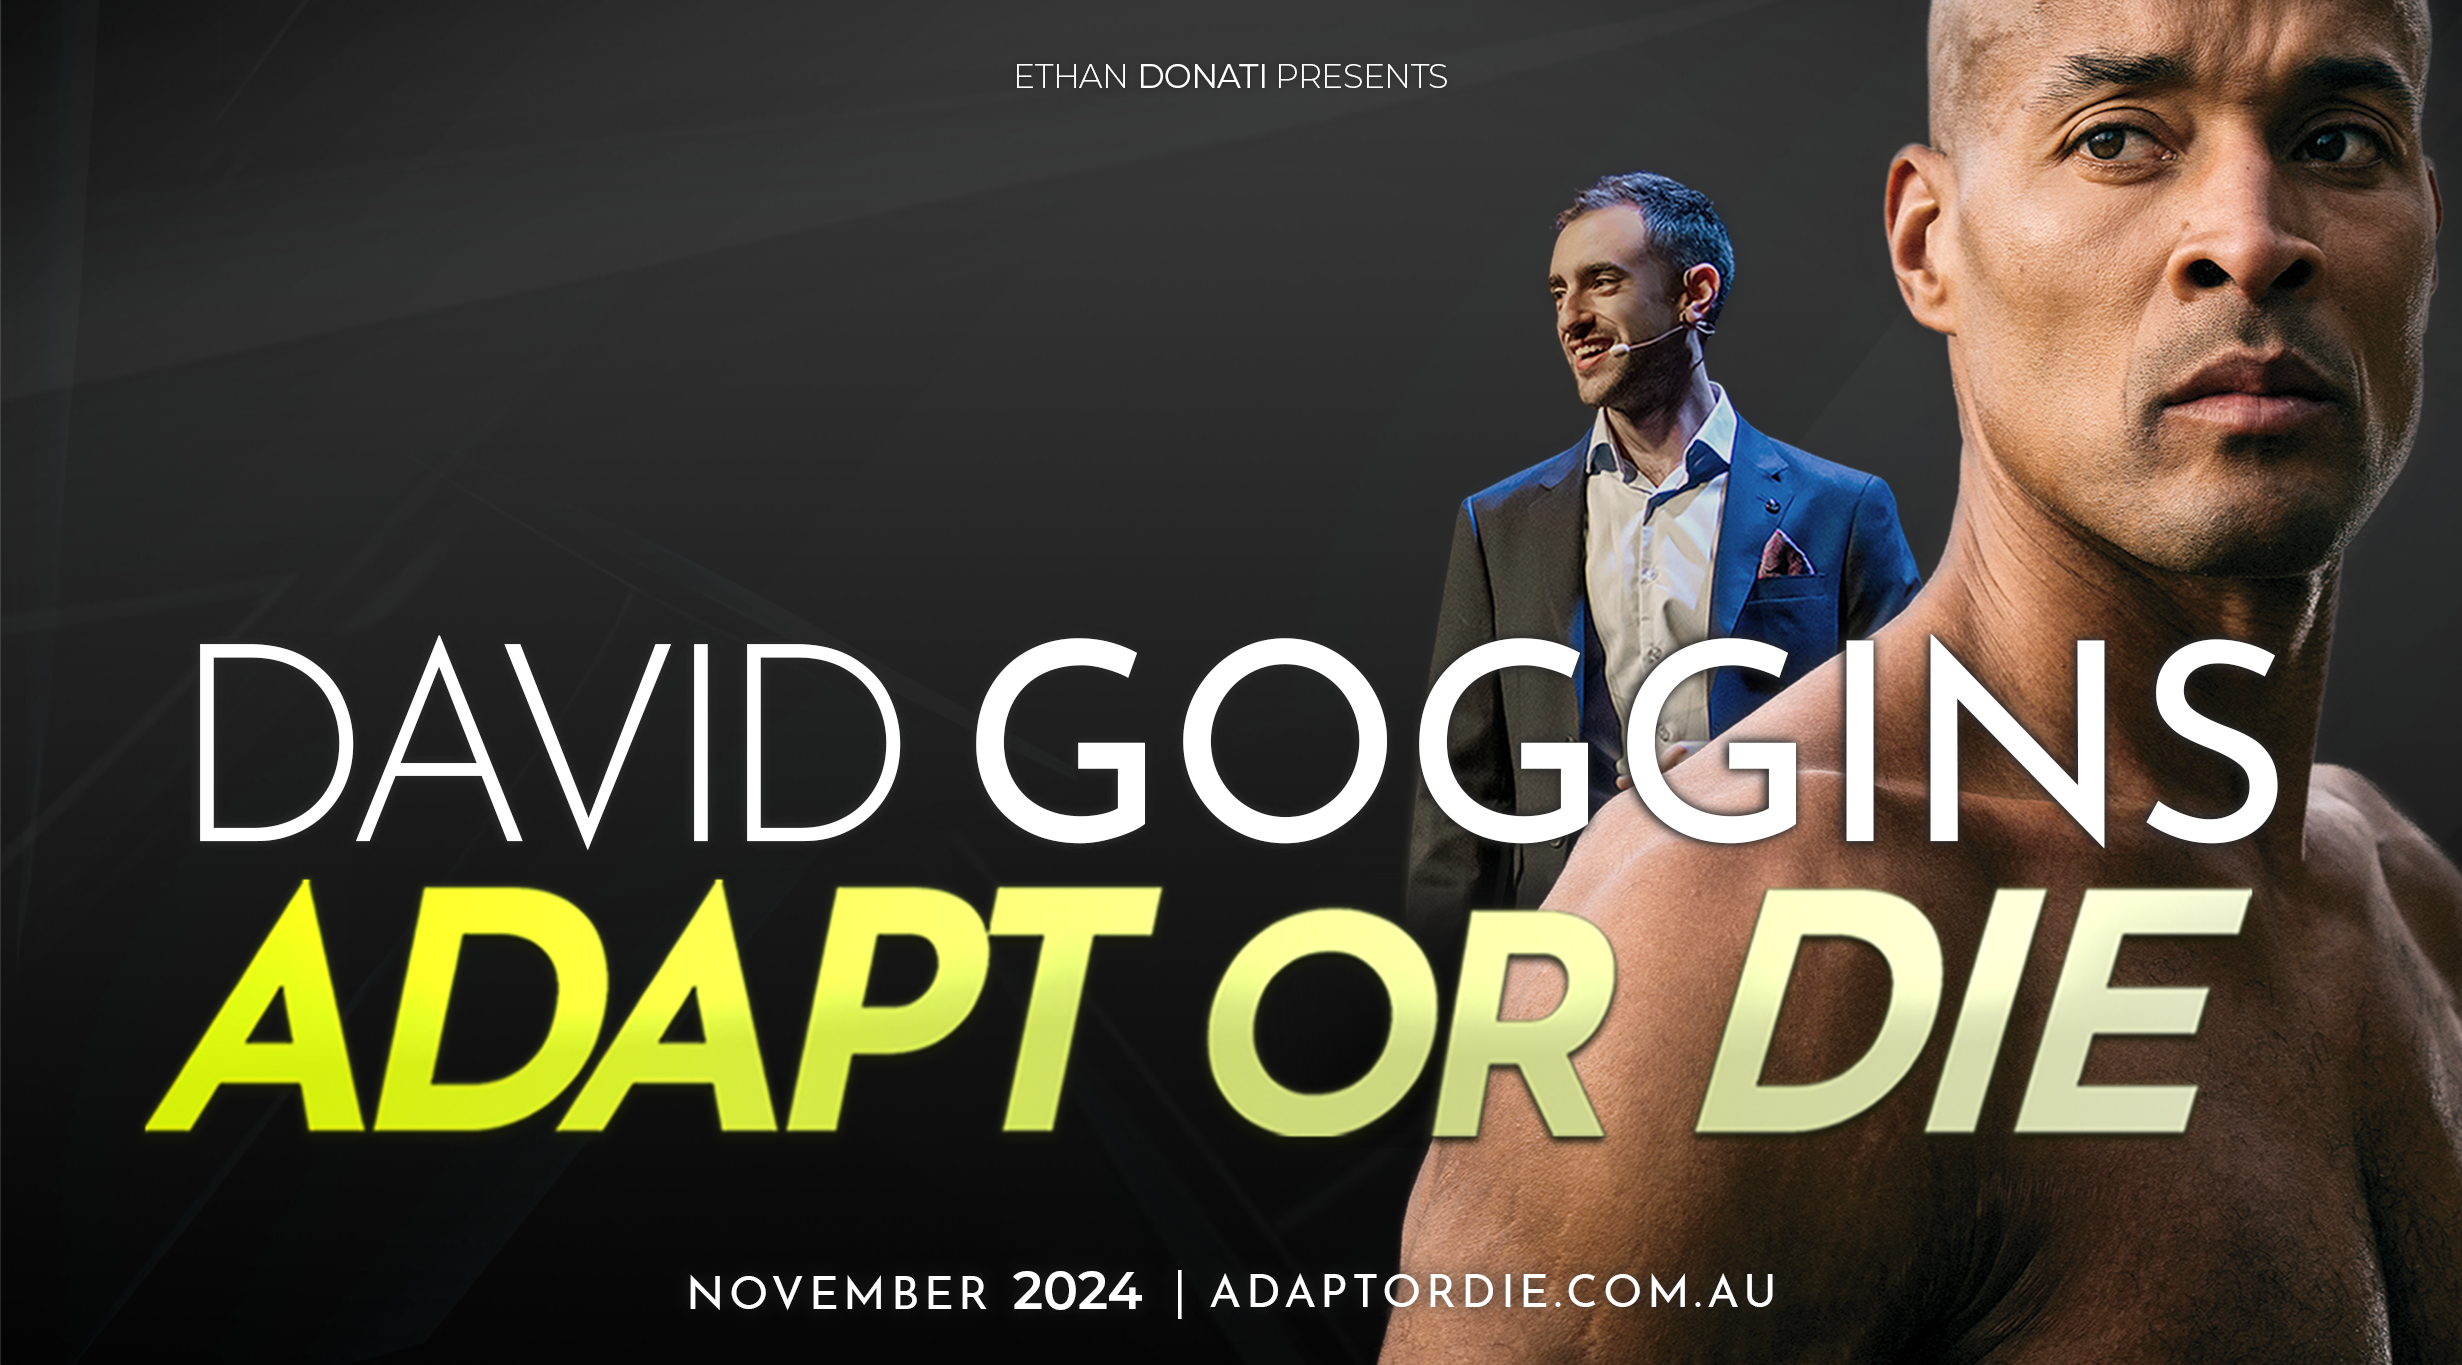 David Goggins - Perth - Adapt or Die in Mt Claremont promo photo for Earlybird presale offer code